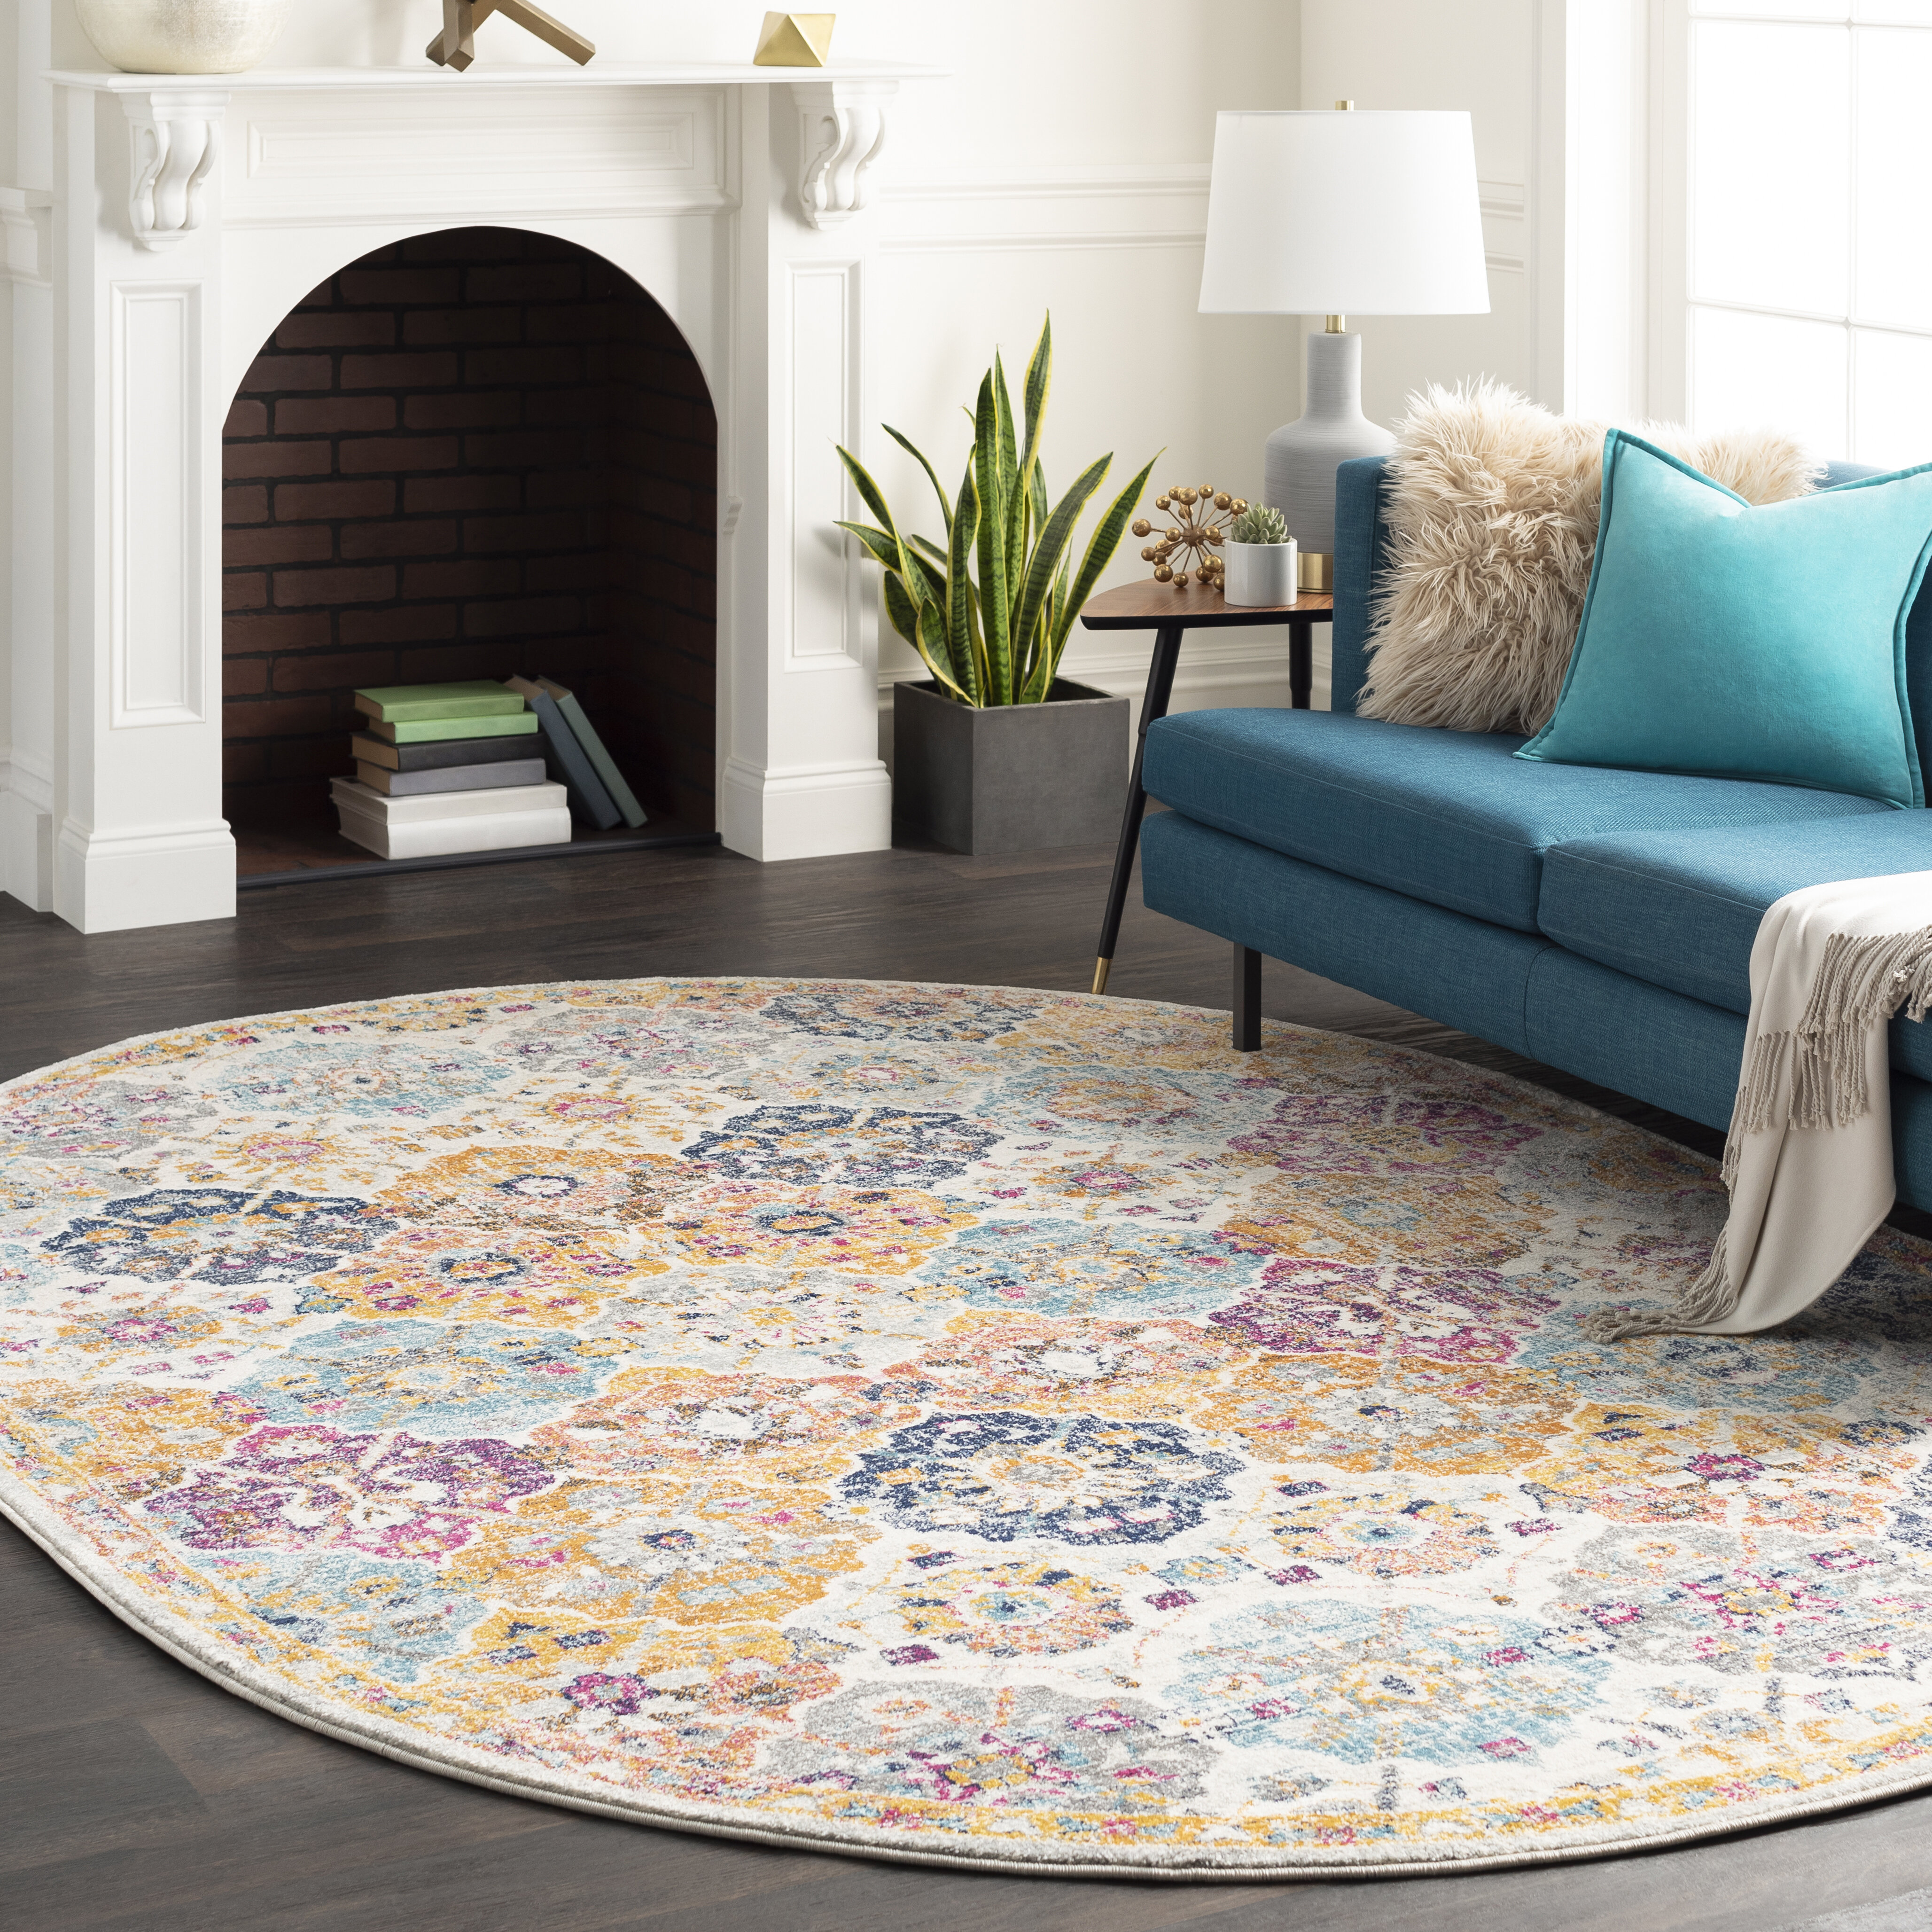 Oval Area Rugs You Ll Love In 2021 Wayfair